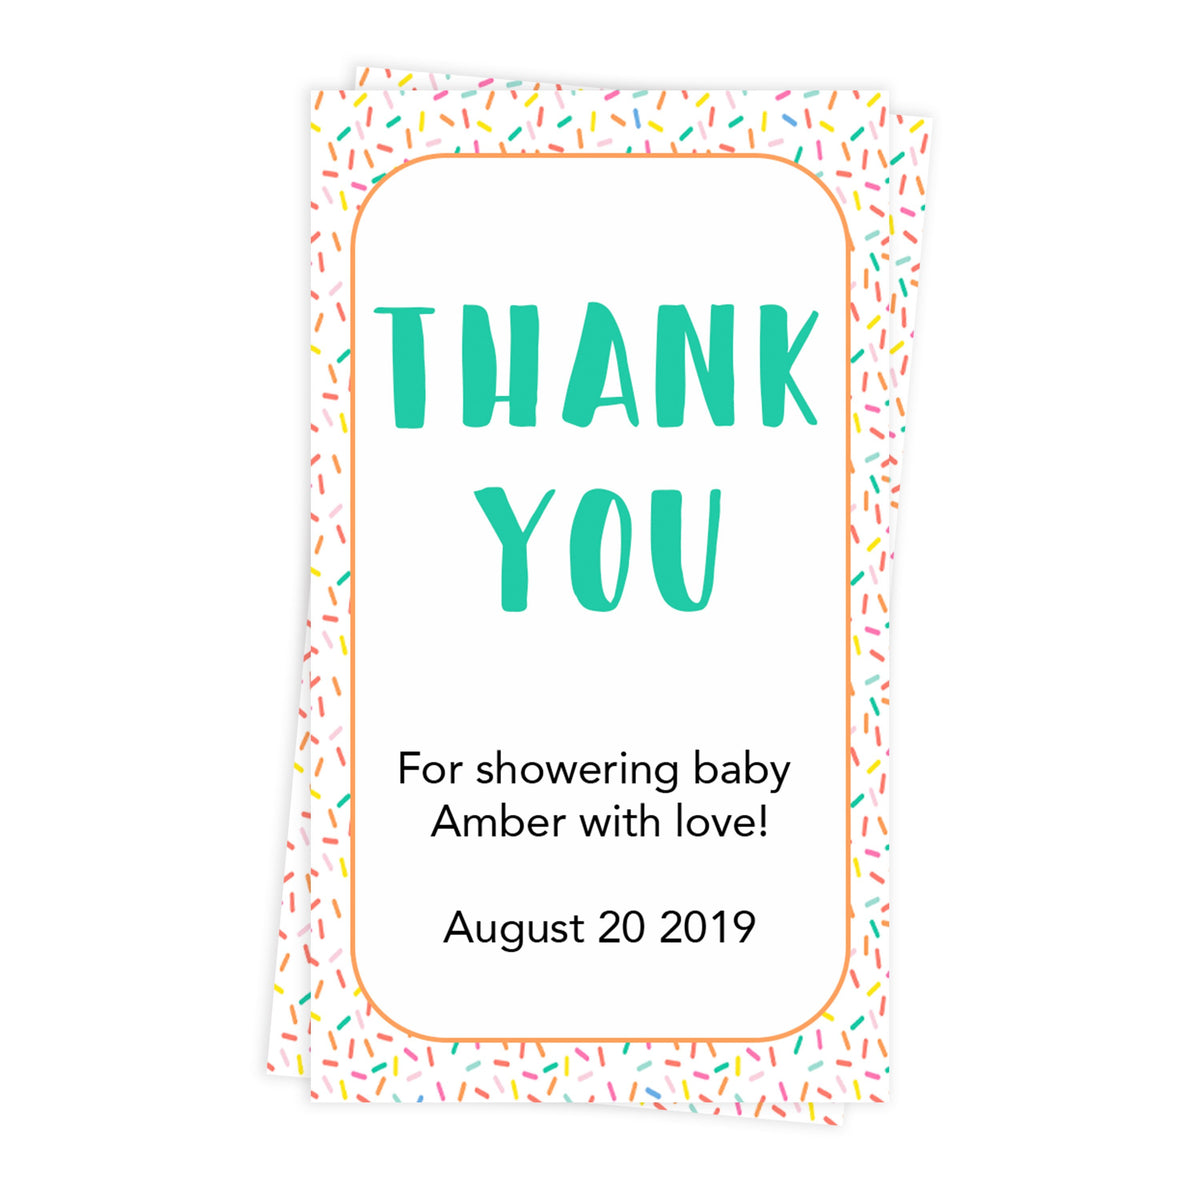 printable baby shower thank you tags, editable baby shower thank you tags, baby sprinkle thank you tags, baby sprinkle ideas